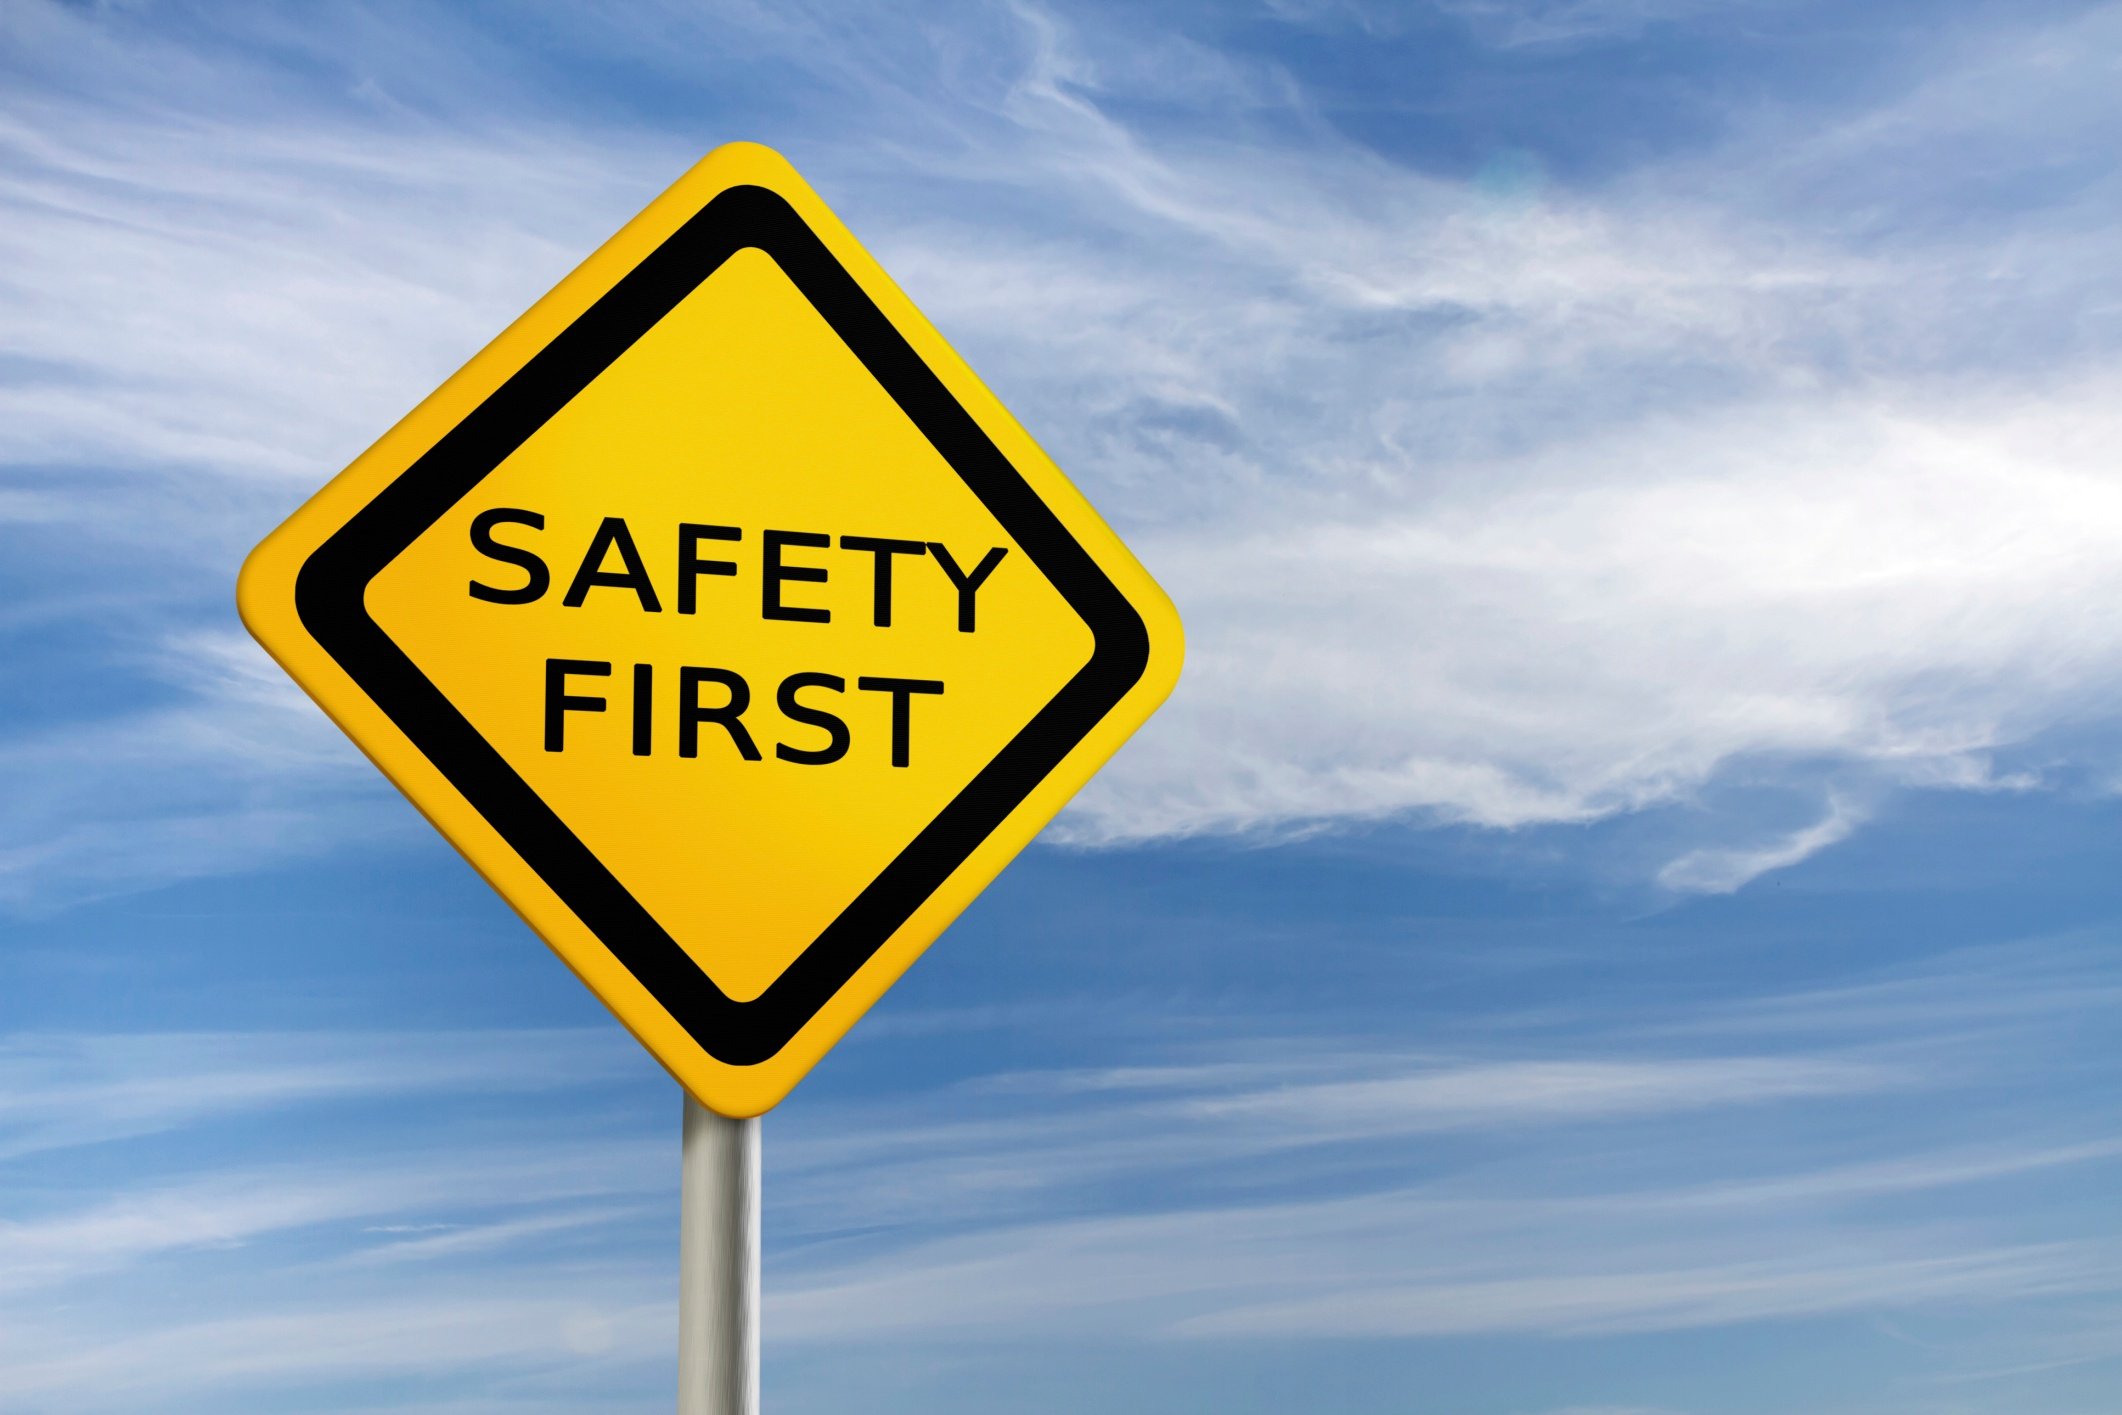 Discover why you should replace damaged safety equipment.